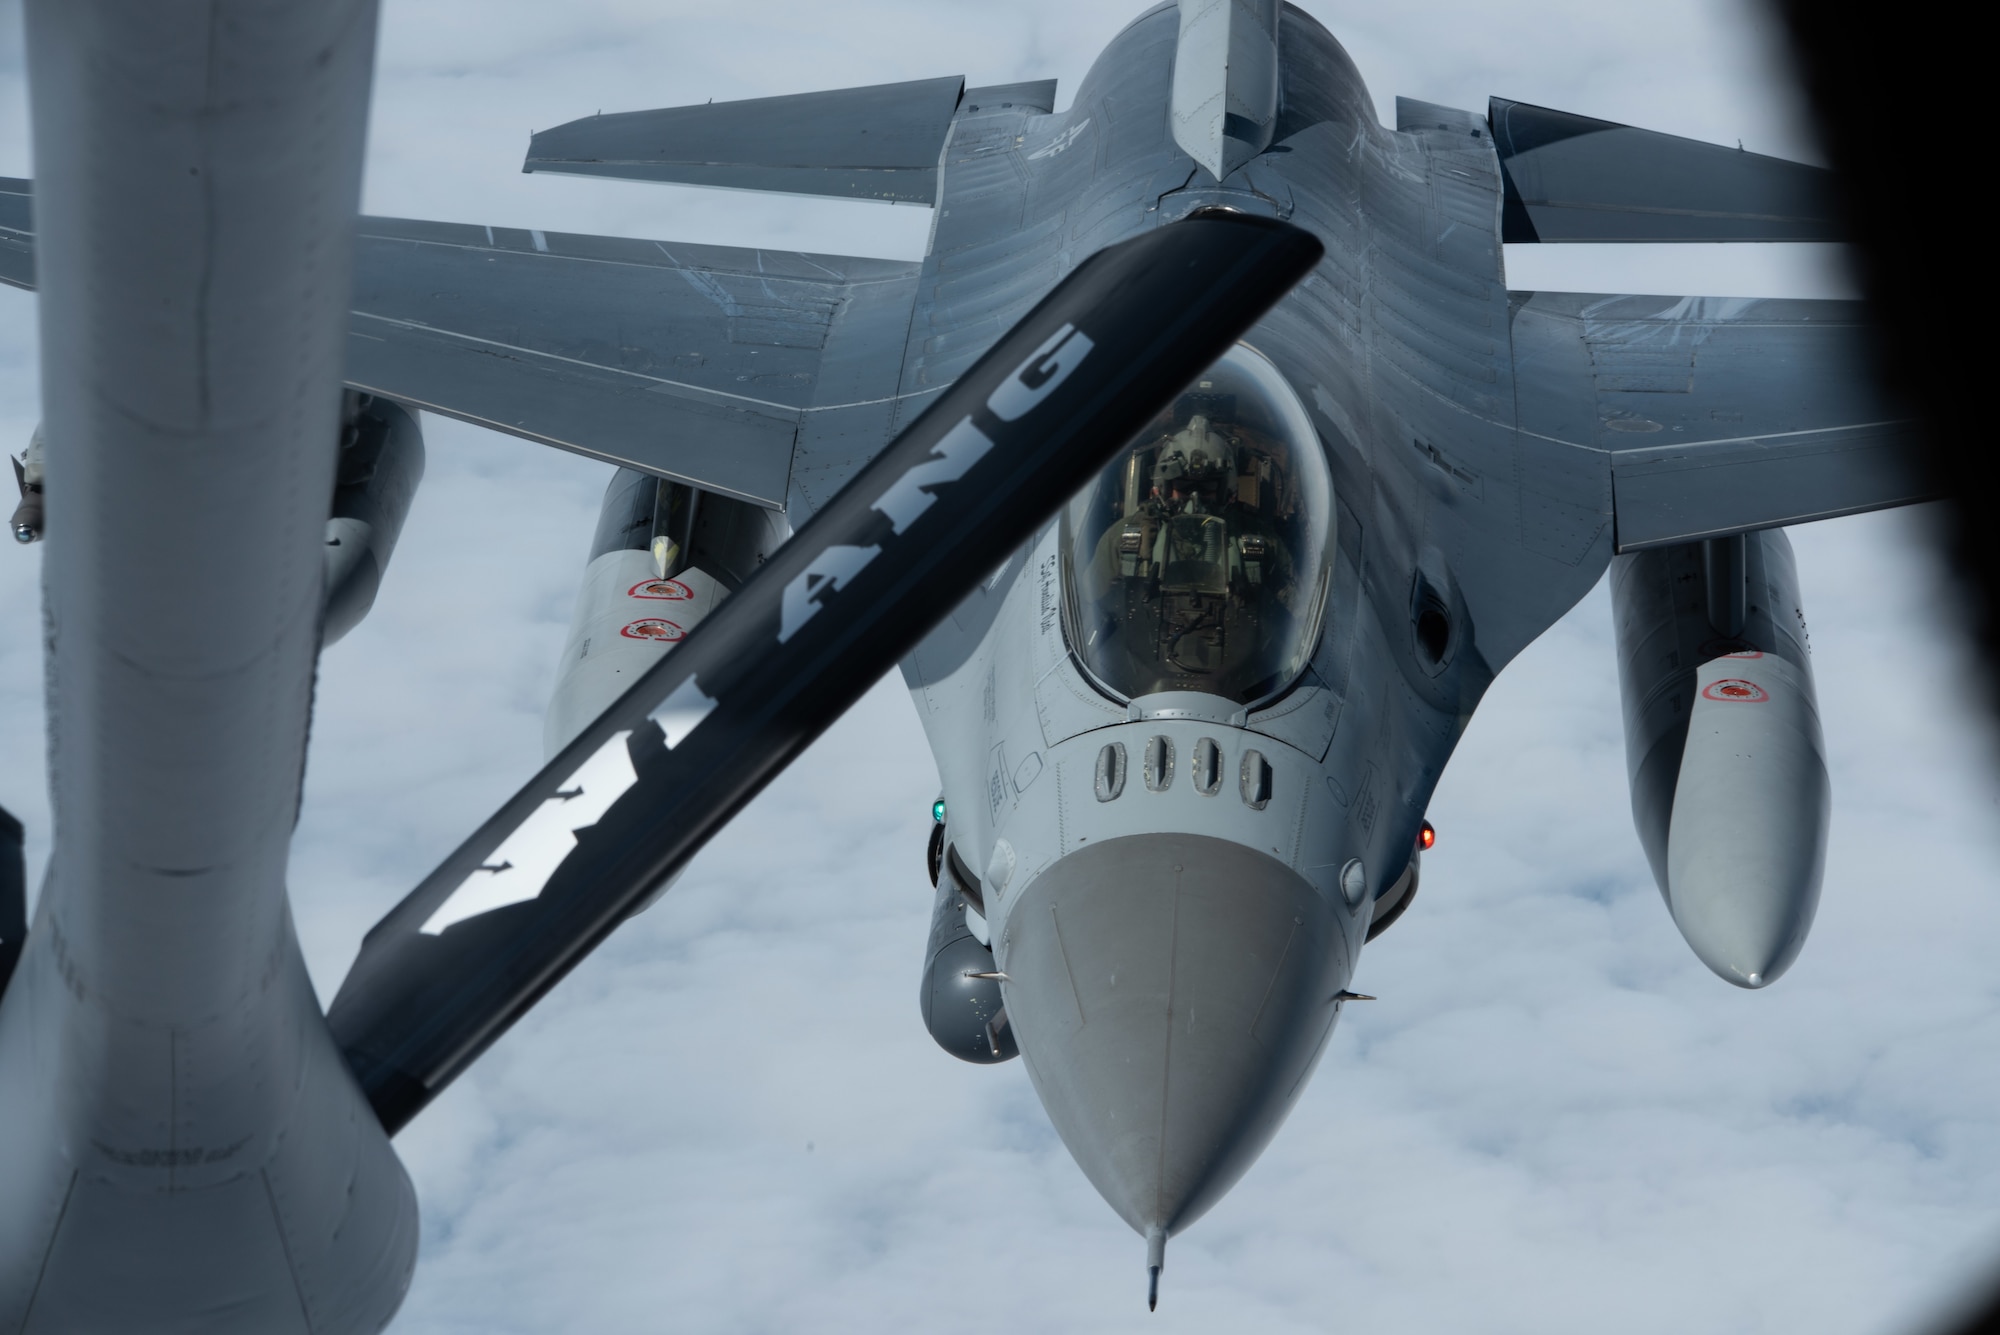 A U.S. Air Force F-16 Fighting Falcon with the 140th Wing, Colorado National Guard, approaches a KC-135 Stratotanker from the 128th Air Refueling Wing, Wisconsin National Guard, as it prepares to receive fuel as part of an air bridge in preparation for exercise Air Defender 2023 over the Atlantic Ocean, June 3, 2023. Air Defender 2023, running June 12-23, is the largest air forces redeployment exercise since NATO was founded, integrating both U.S. and allied airpower to defend shared values, while leveraging and strengthening vital partnerships to deter aggression around the world. (U.S. Air National Guard photo by Master Sgt. Kellen Kroening)